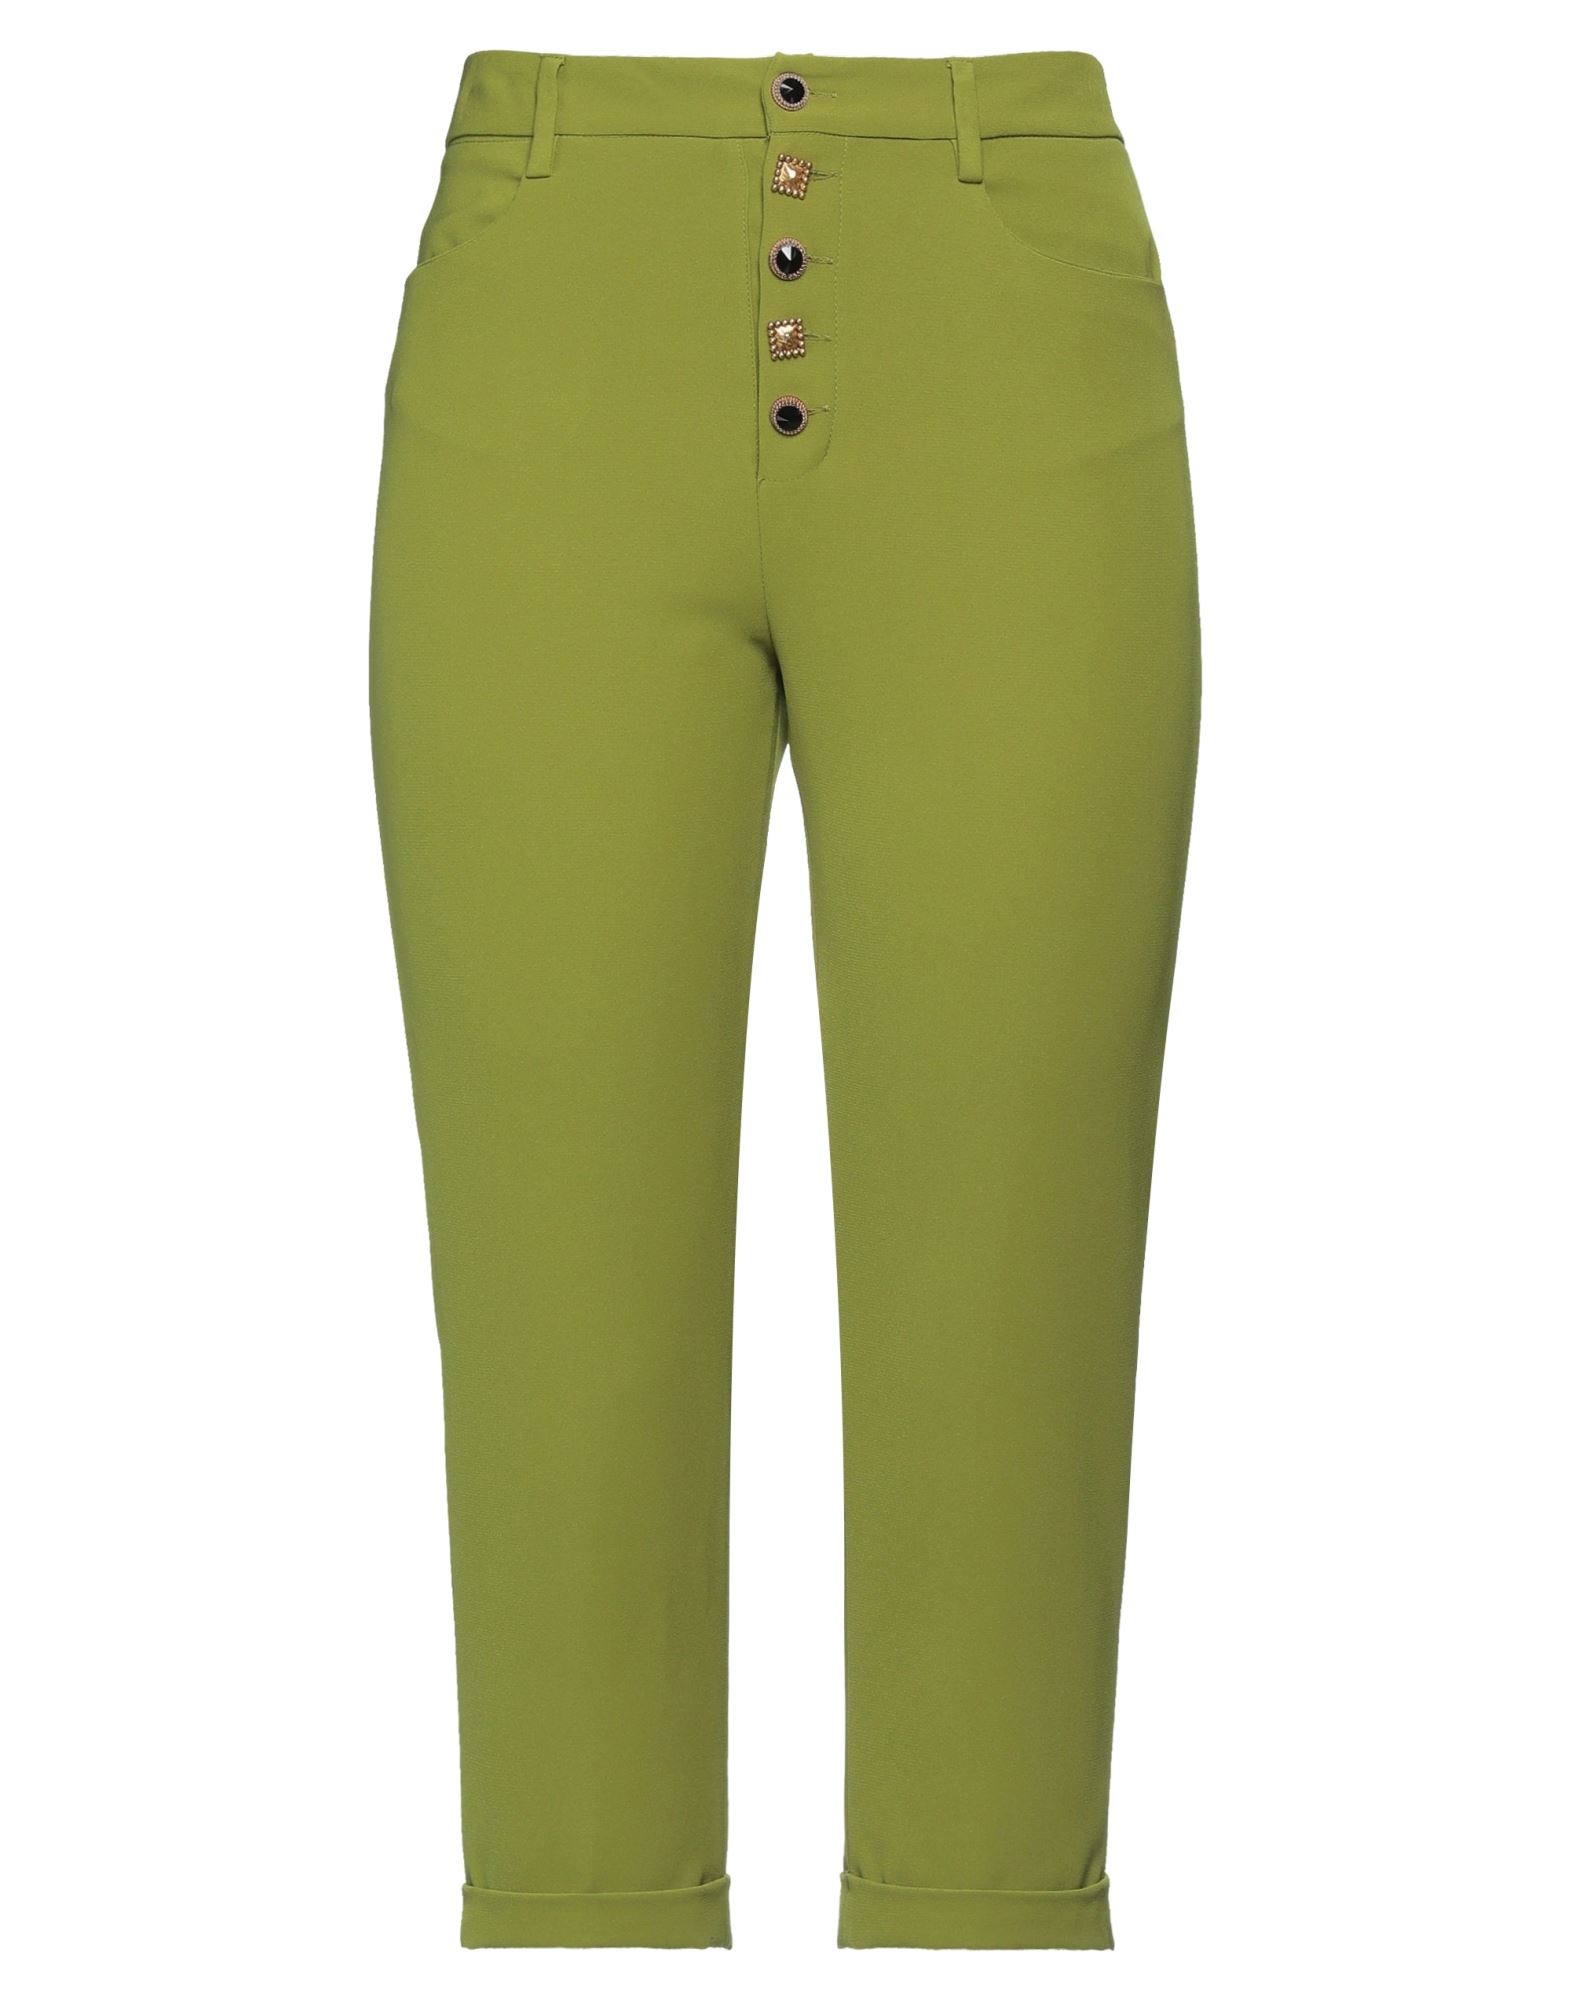 1-one Cropped Pants In Military Green